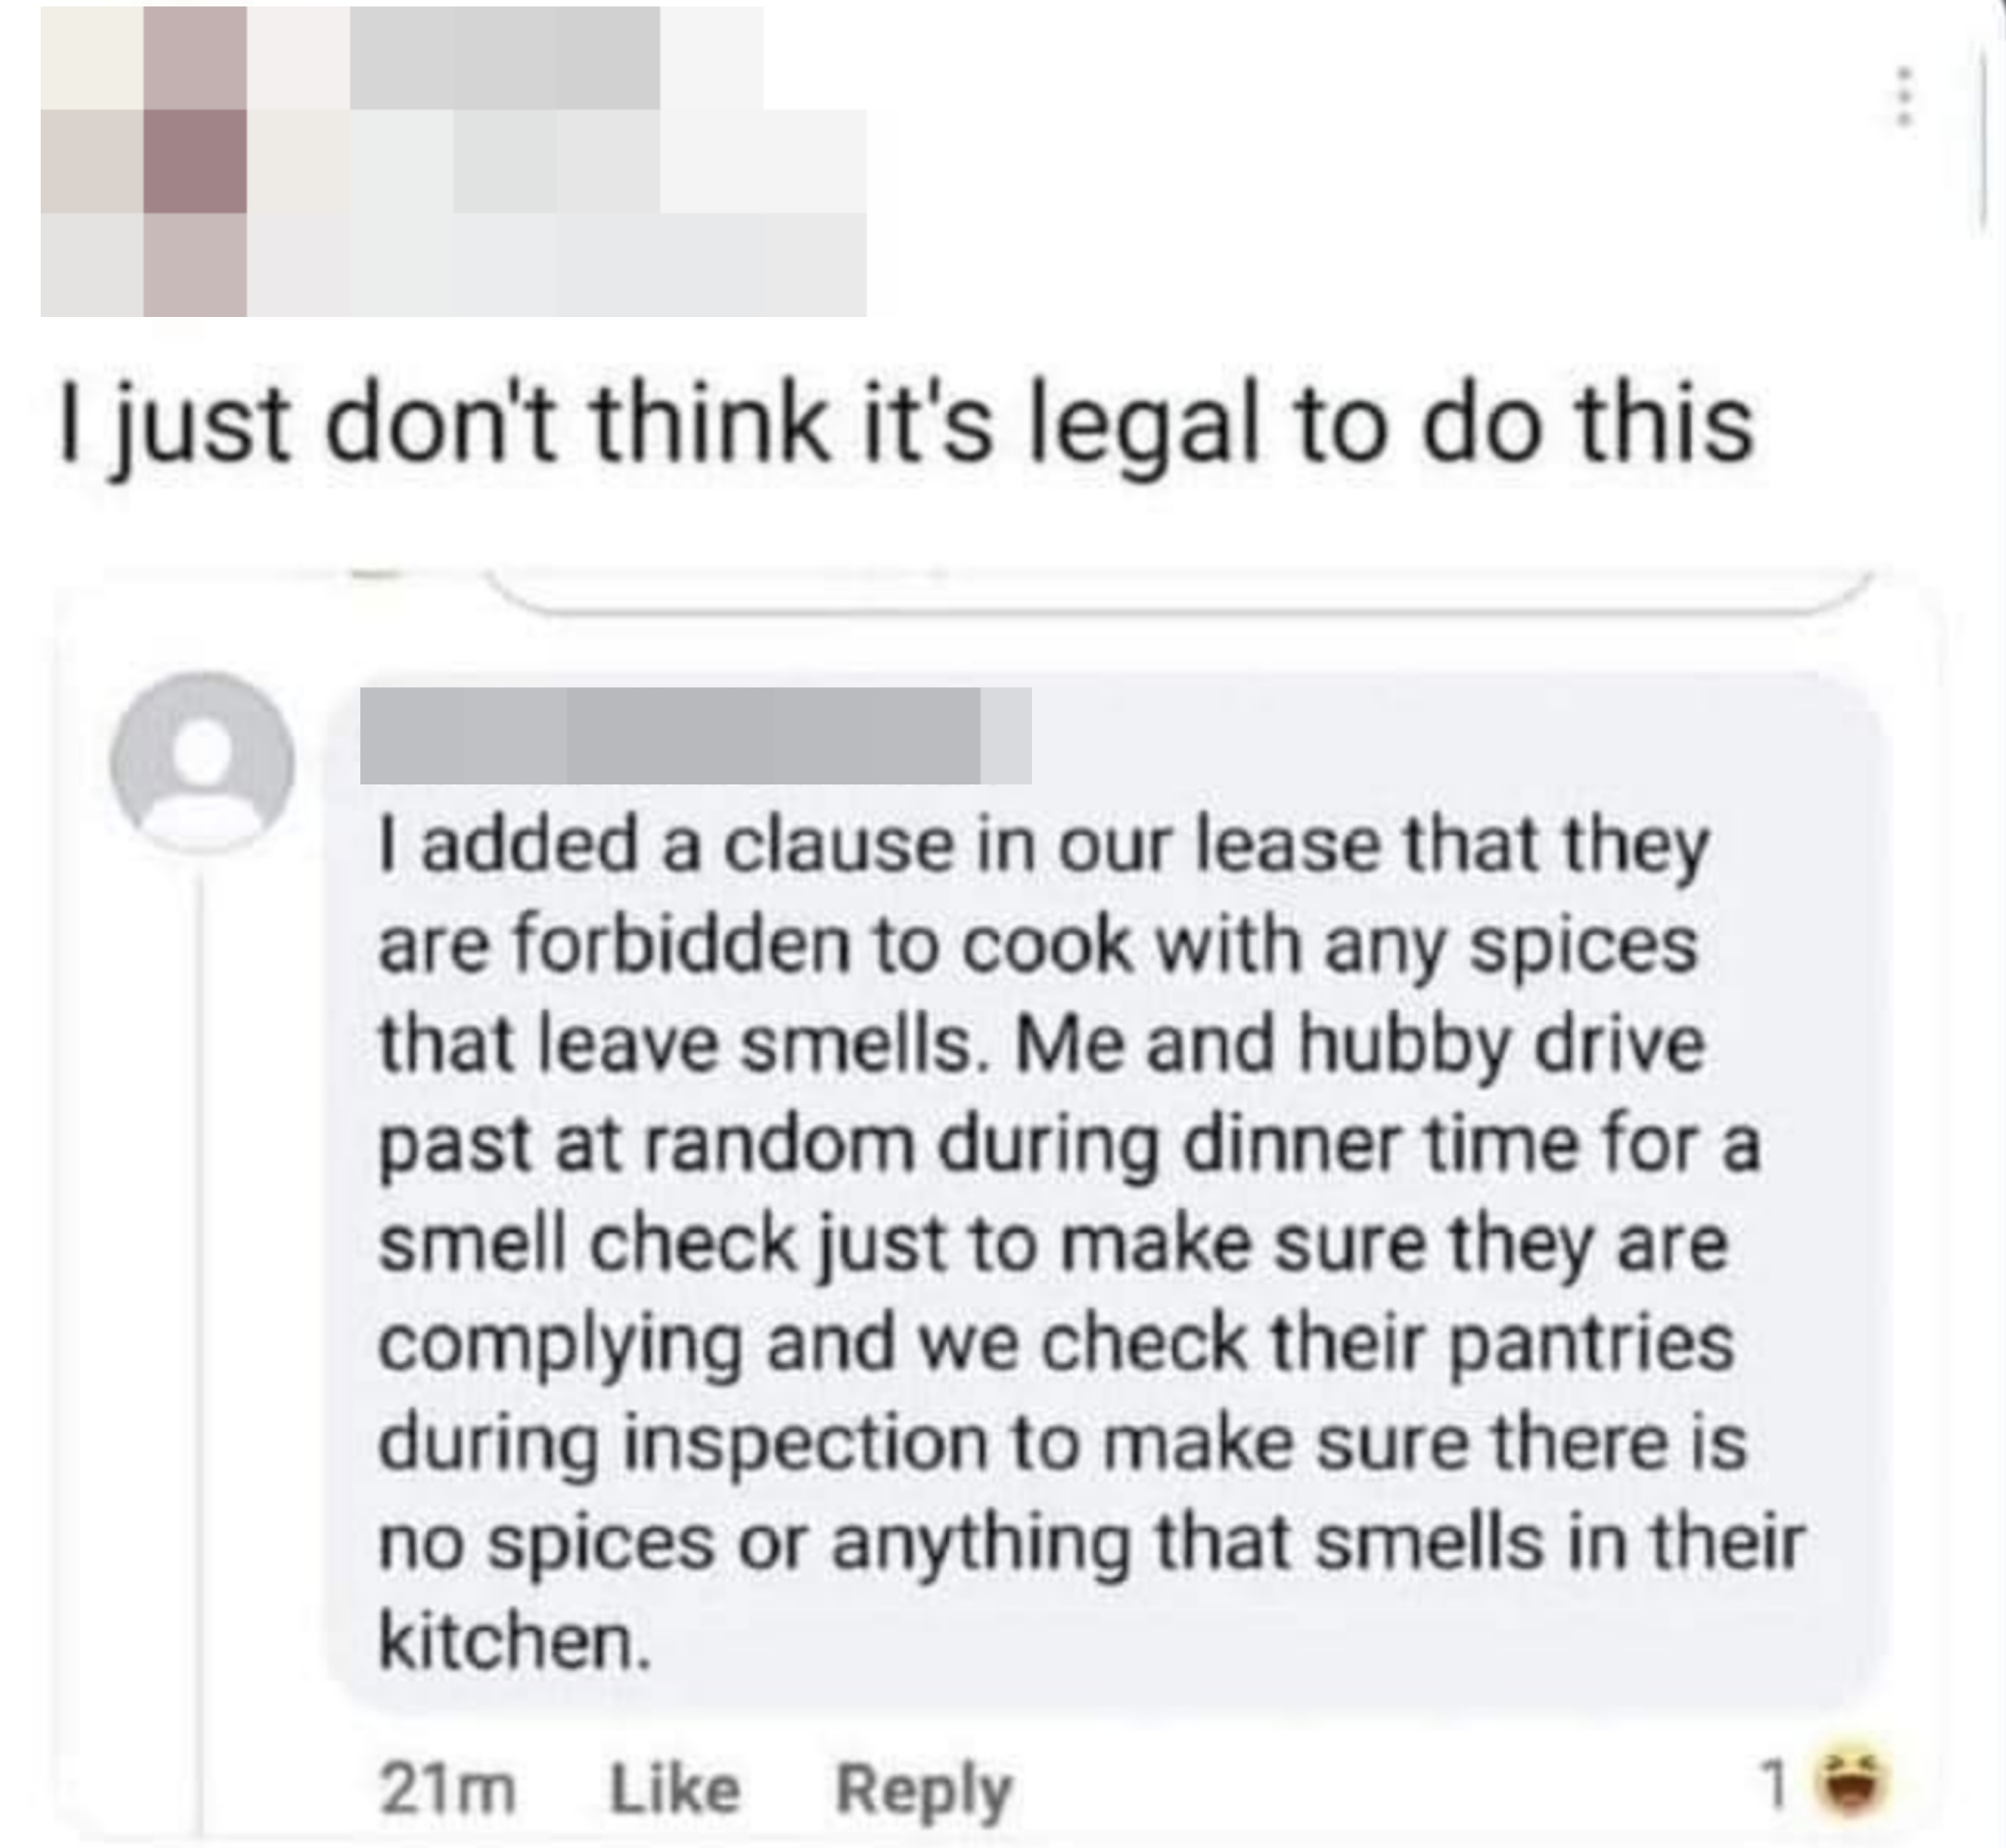 someone posting about the landlord&#x27;s rule saying they don&#x27;t think it&#x27;s legal